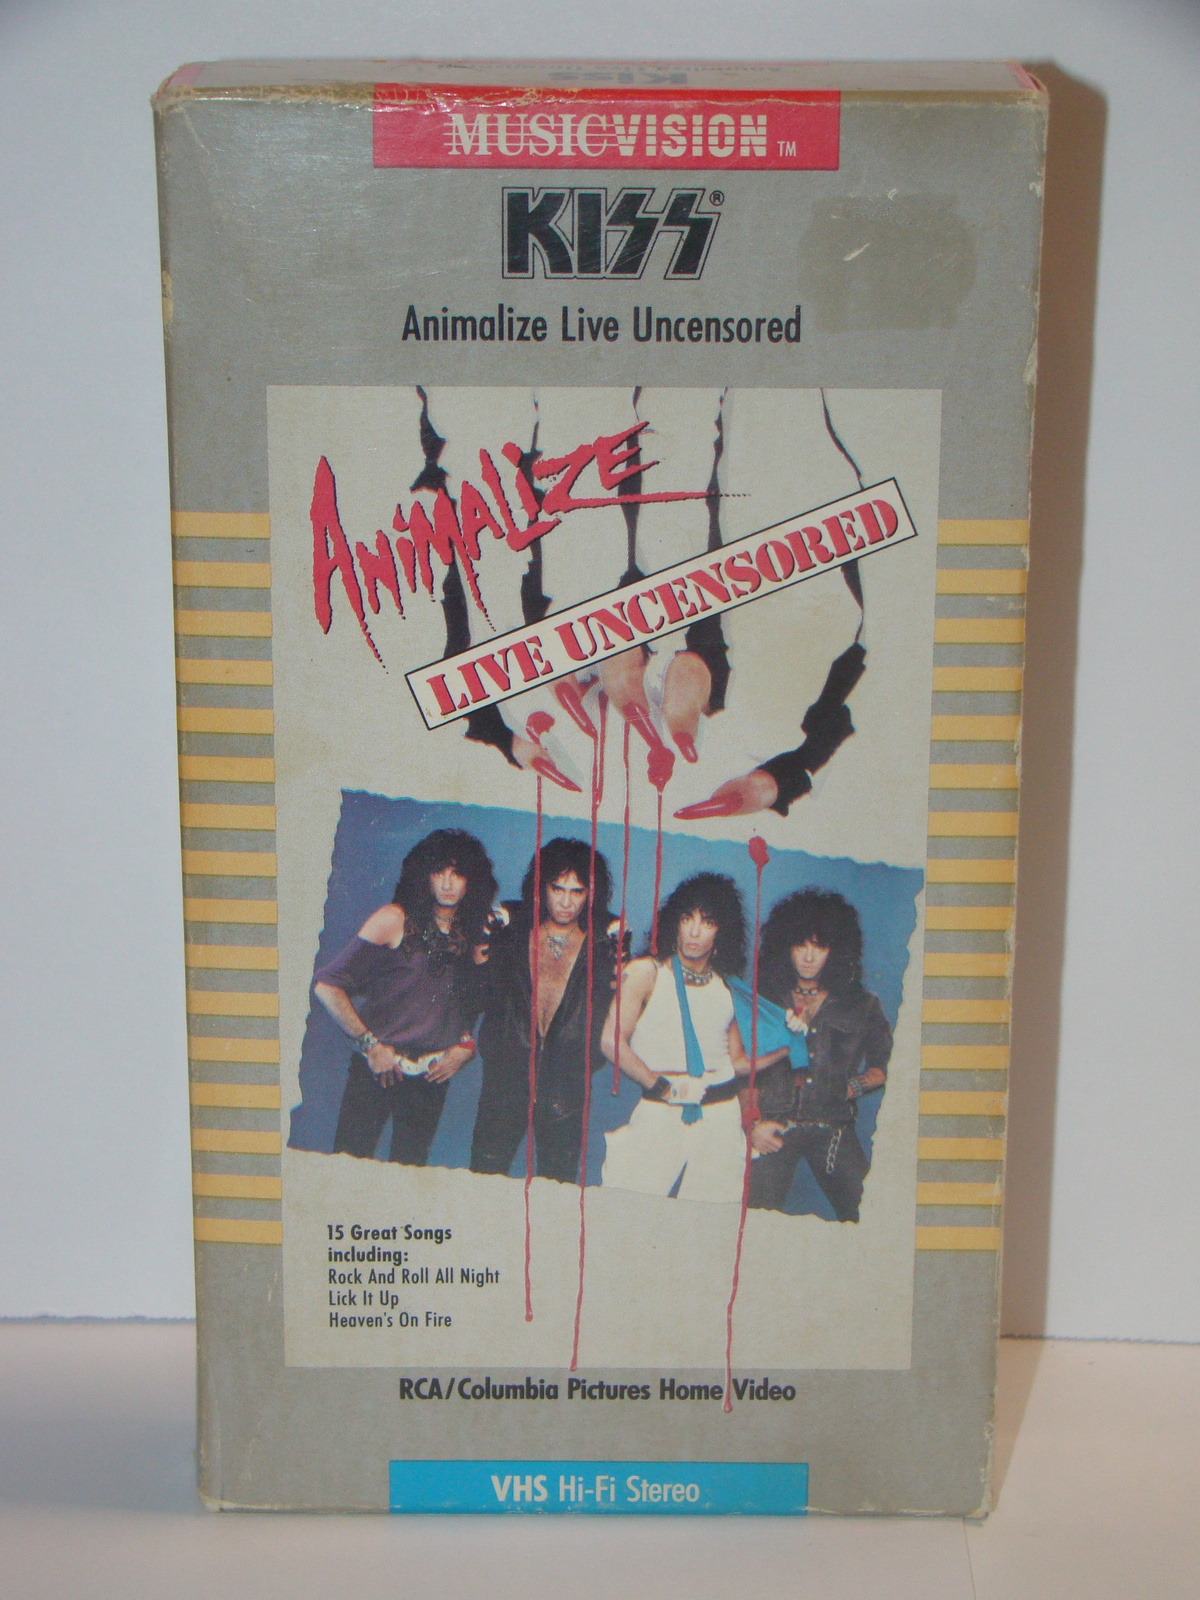 Primary image for KISS Animalize Live UNCENSORED (VHS)